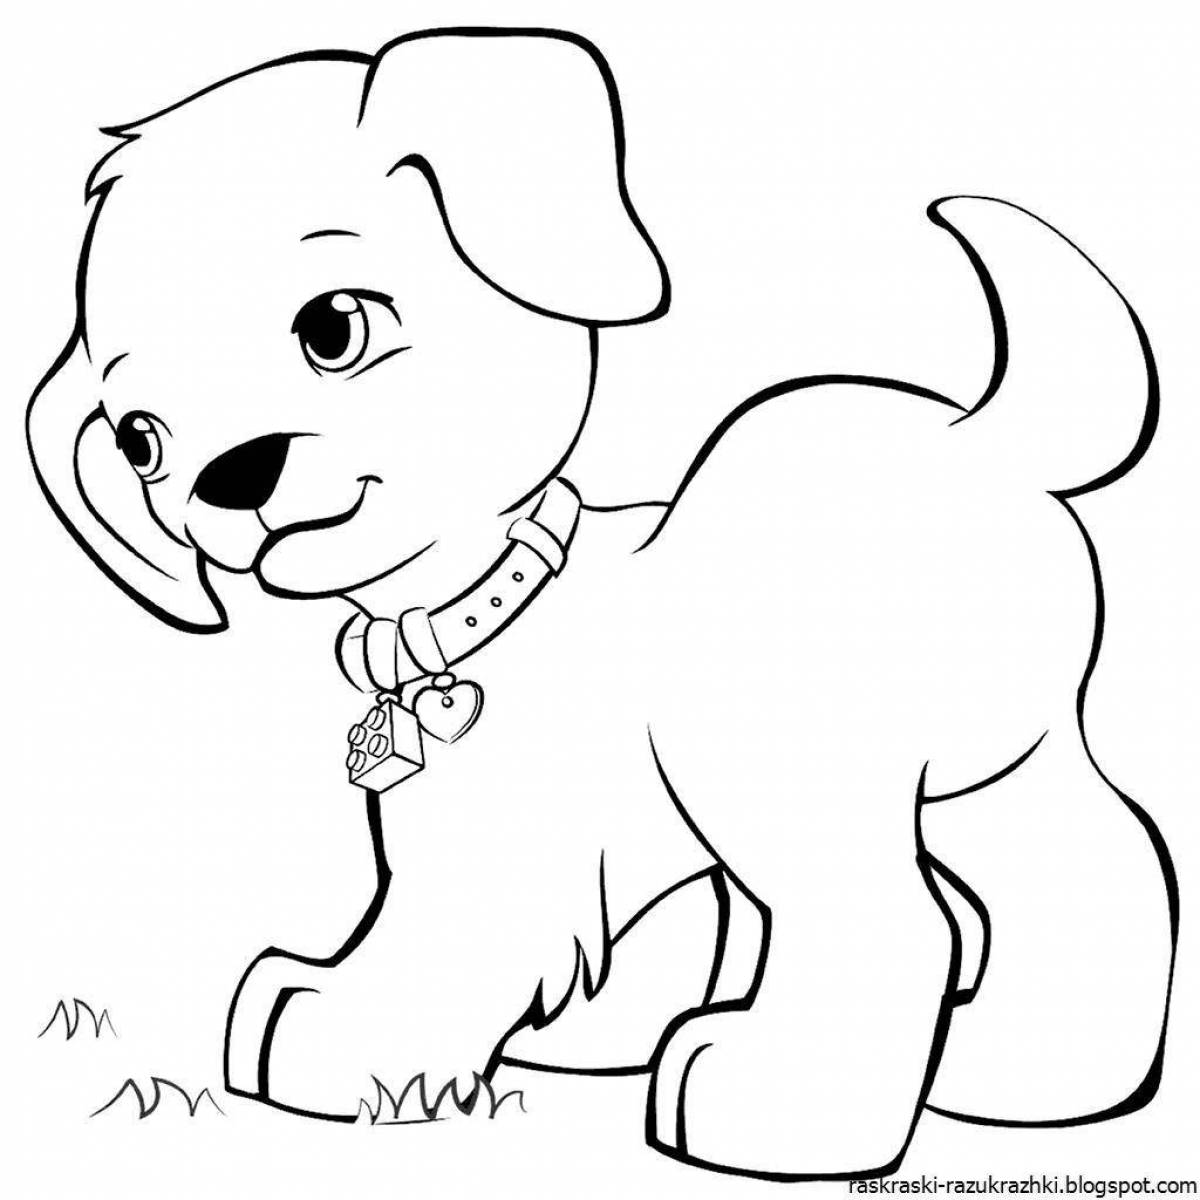 Curious coloring drawing of a puppy